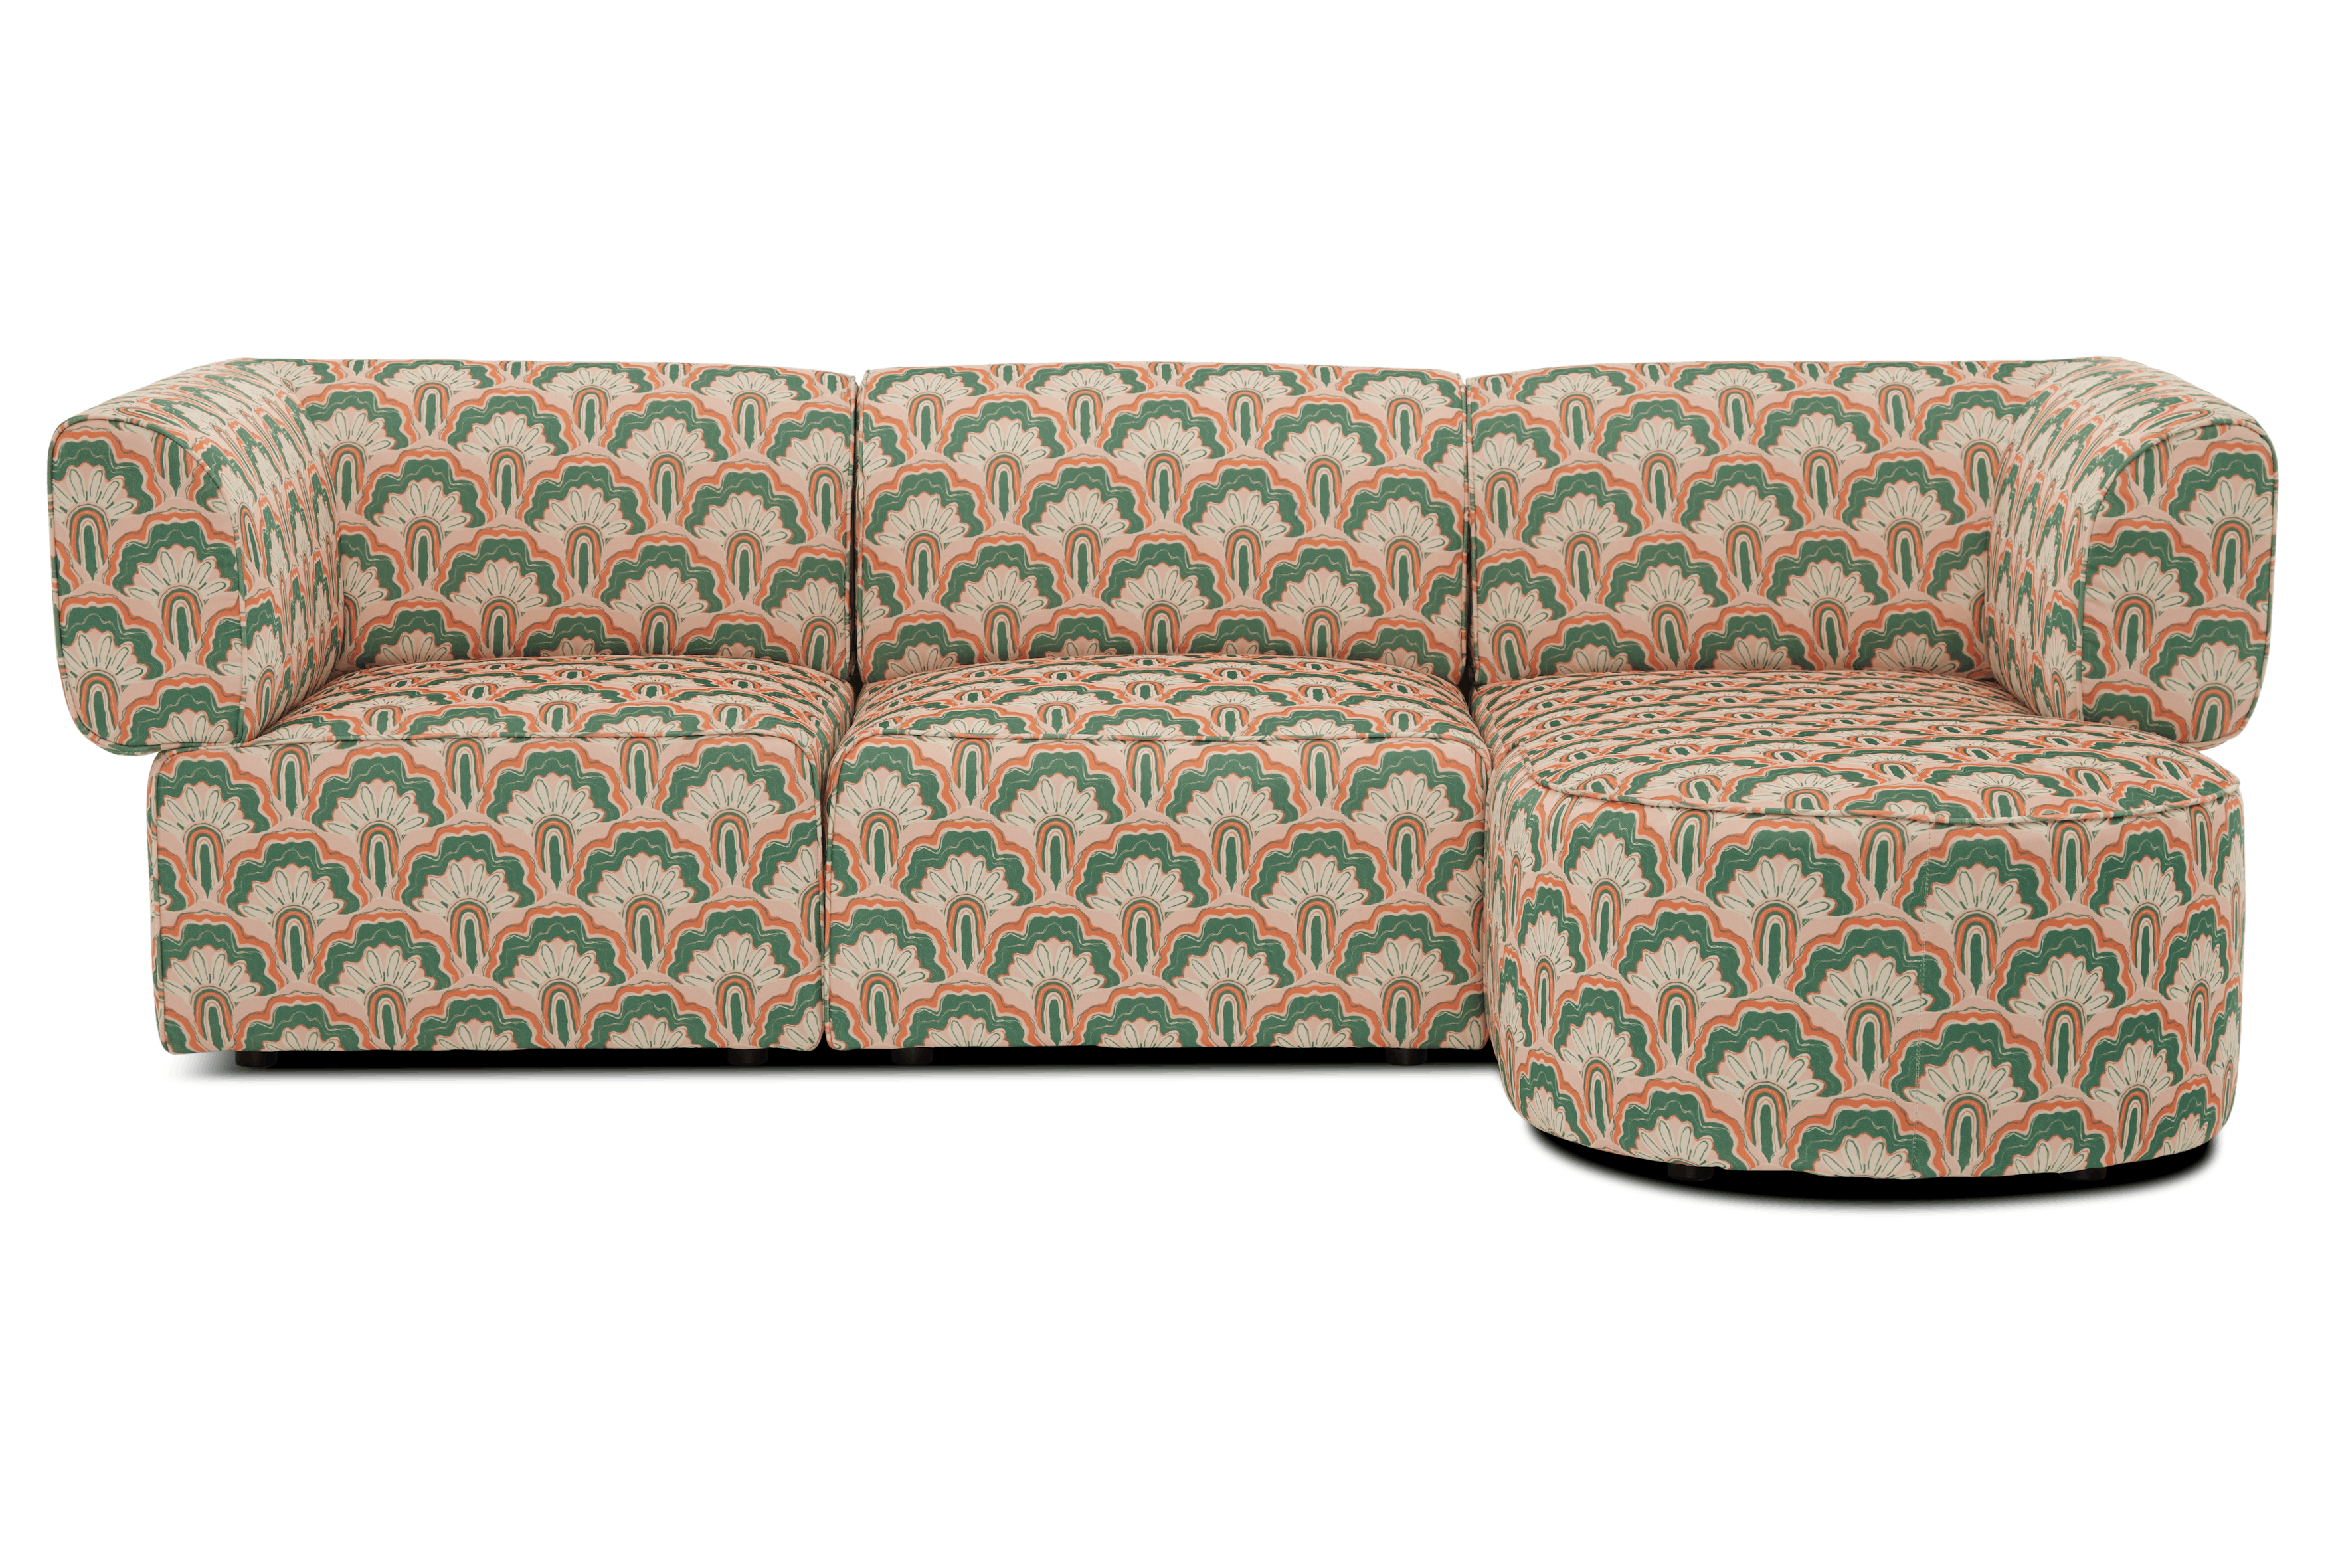 deco peacock diane modular chaise sectional %28limited edition%29 deco peacock